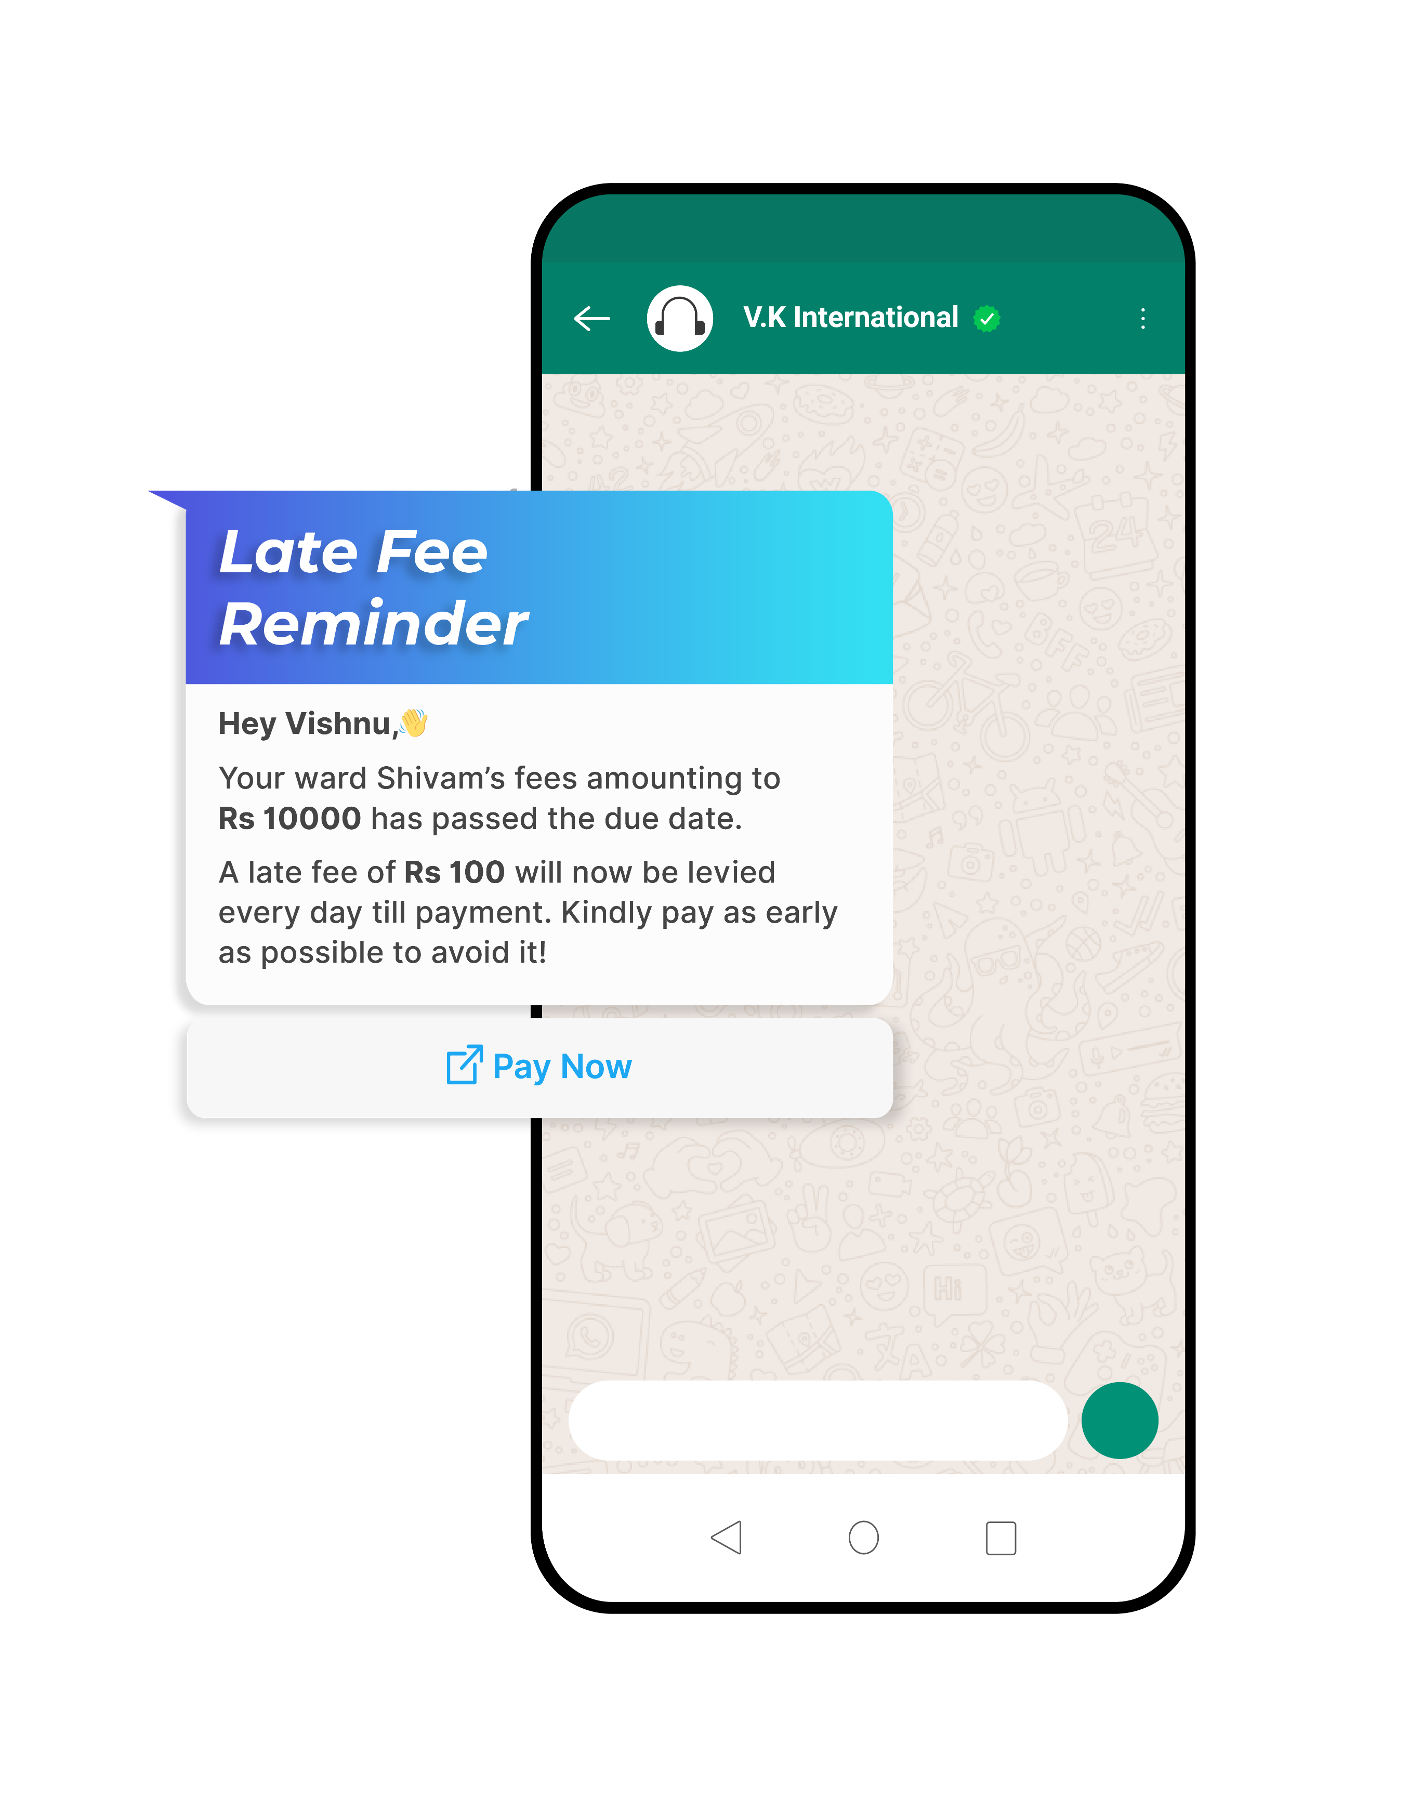 Late Fee Payment Reminder